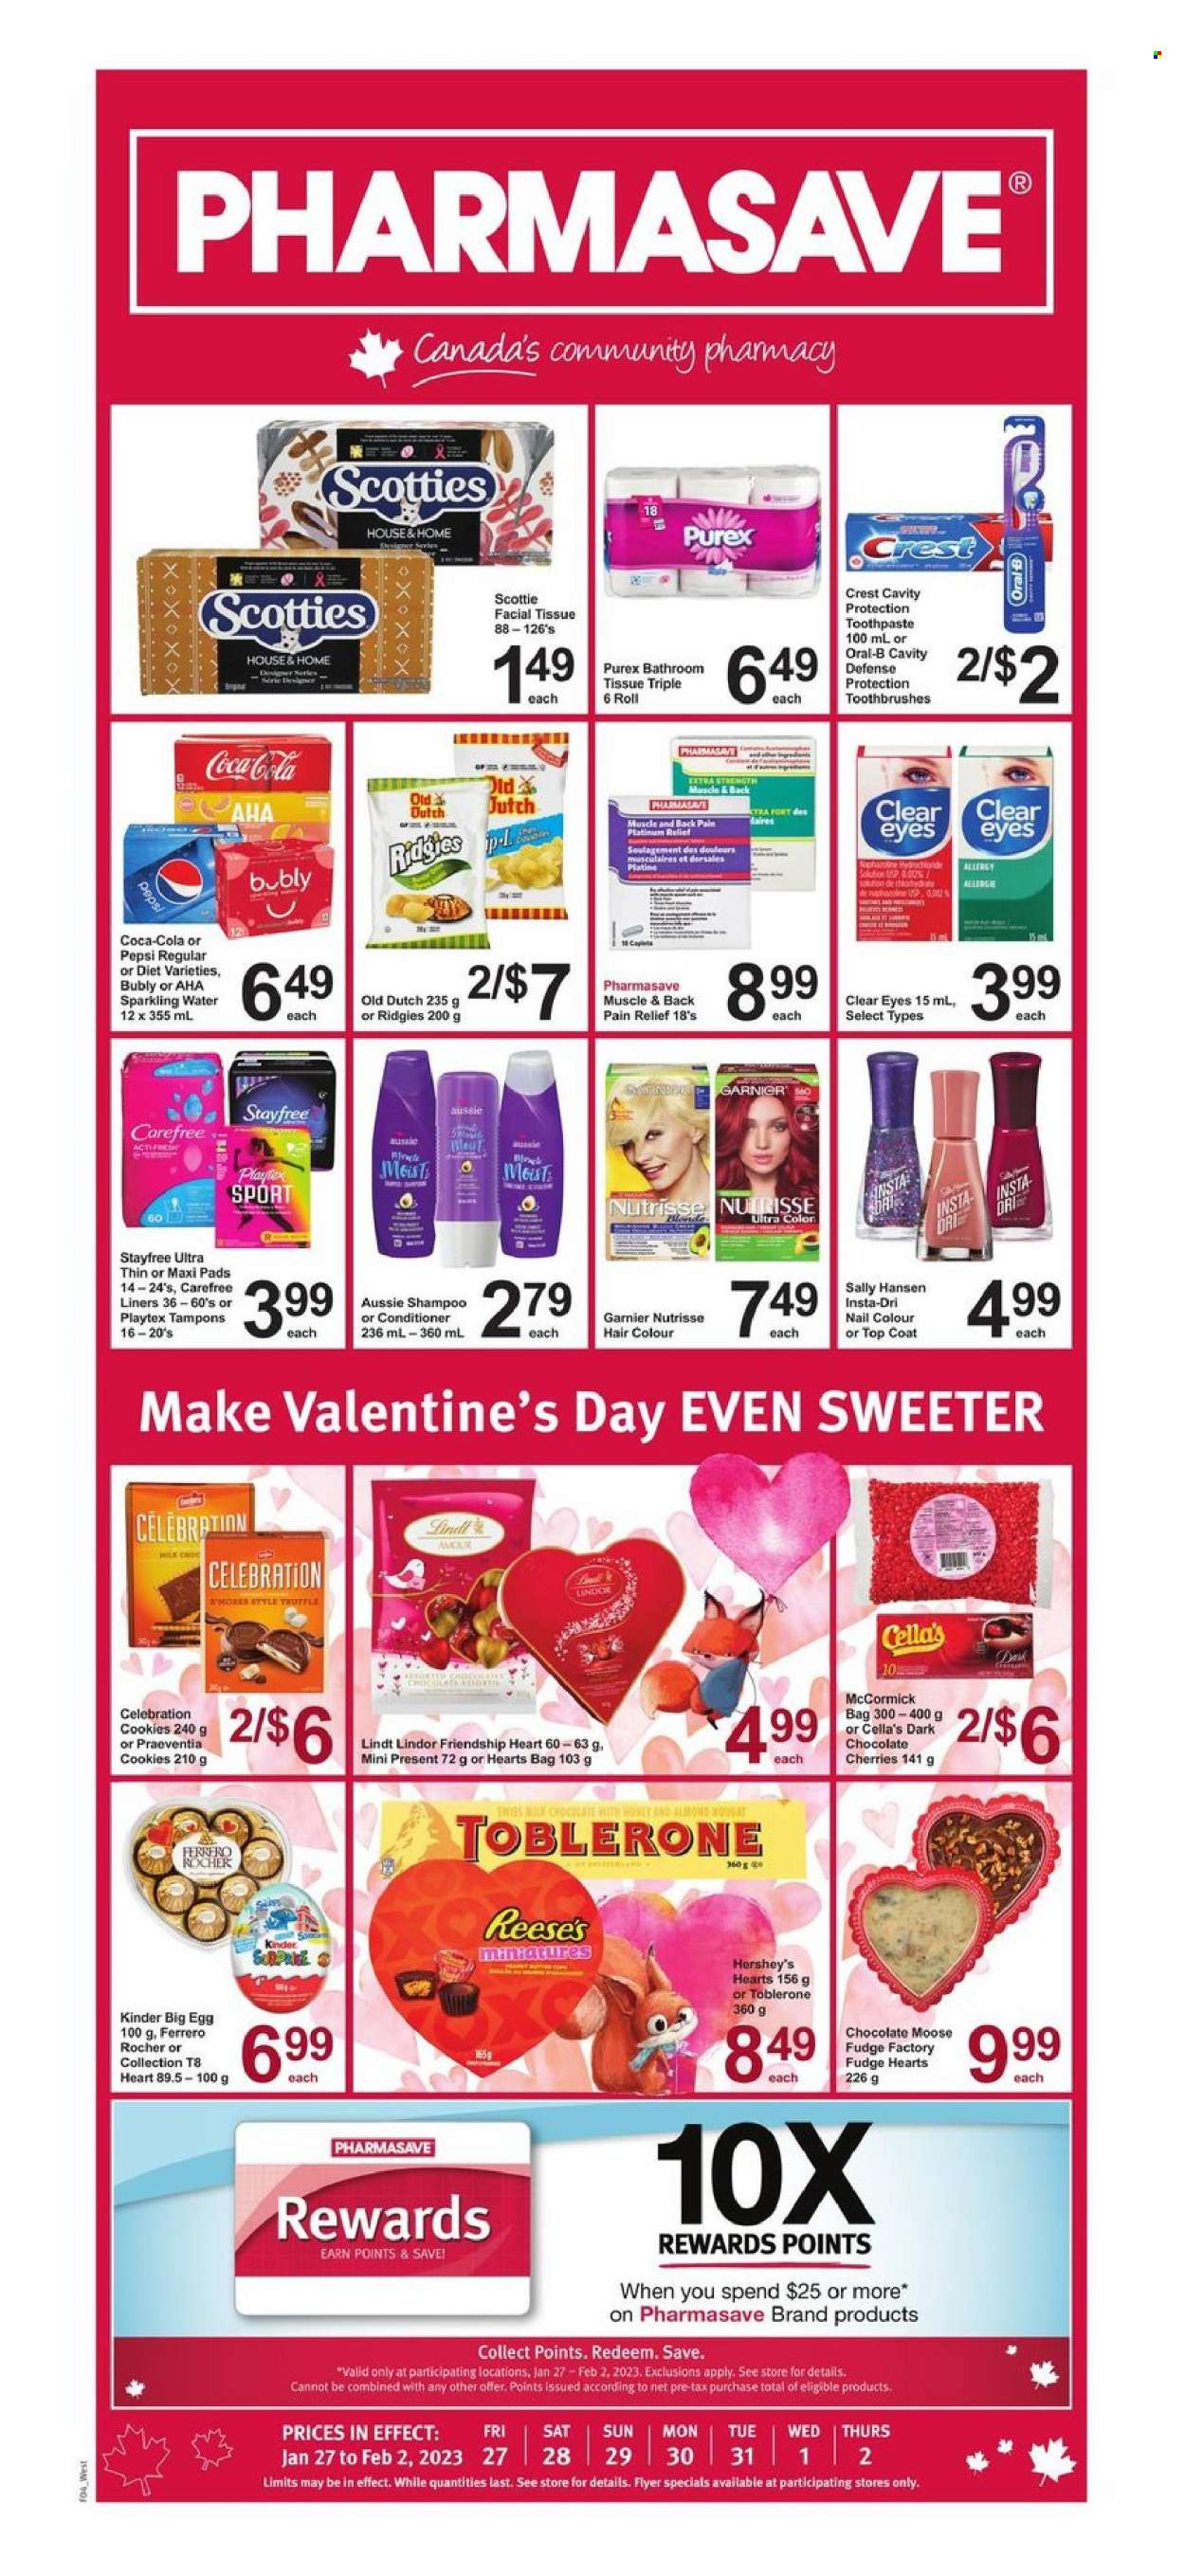 thumbnail - Pharmasave Flyer - January 27, 2023 - February 02, 2023 - Sales products - cherries, eggs, Reese's, Hershey's, cookies, fudge, milk chocolate, chocolate, truffles, Celebration, dark chocolate, Toblerone, Coca-Cola, Pepsi, sparkling water, bath tissue, Purex, toothpaste, Crest, Stayfree, Playtex, sanitary pads, Carefree, tampons, Aussie, conditioner, hair color, bag, top coat, crate, coat, pain relief, Garnier, Sally Hansen, shampoo, Oral-B, Lindt, Lindor, Ferrero Rocher, nougat. Page 1.